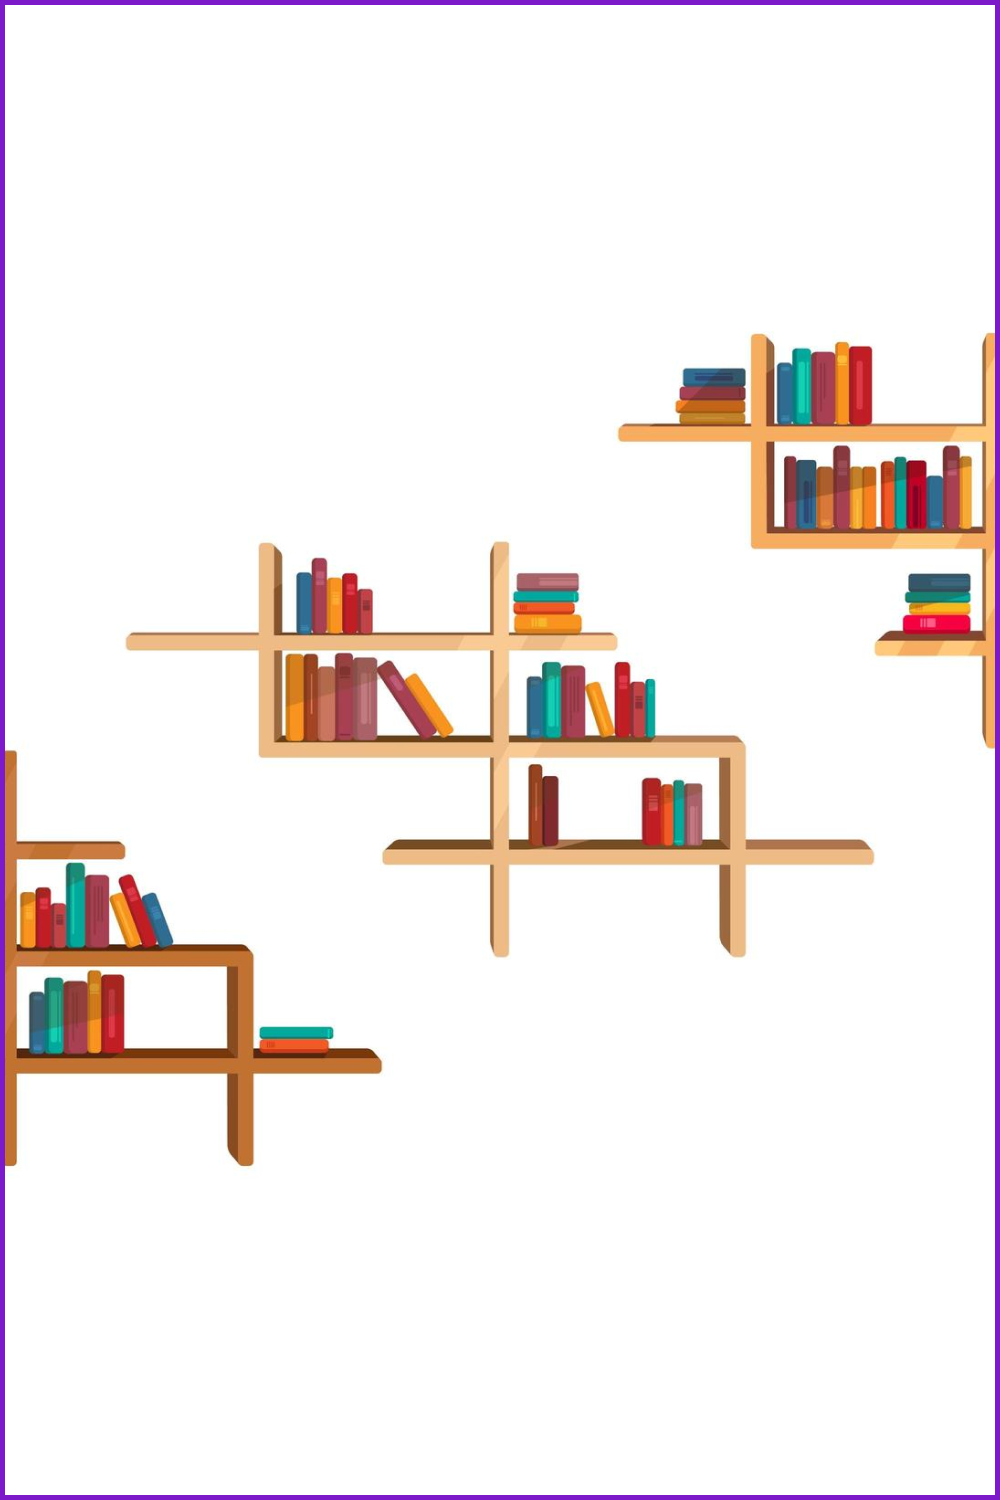 Drawn multi-level shelves with books on them.